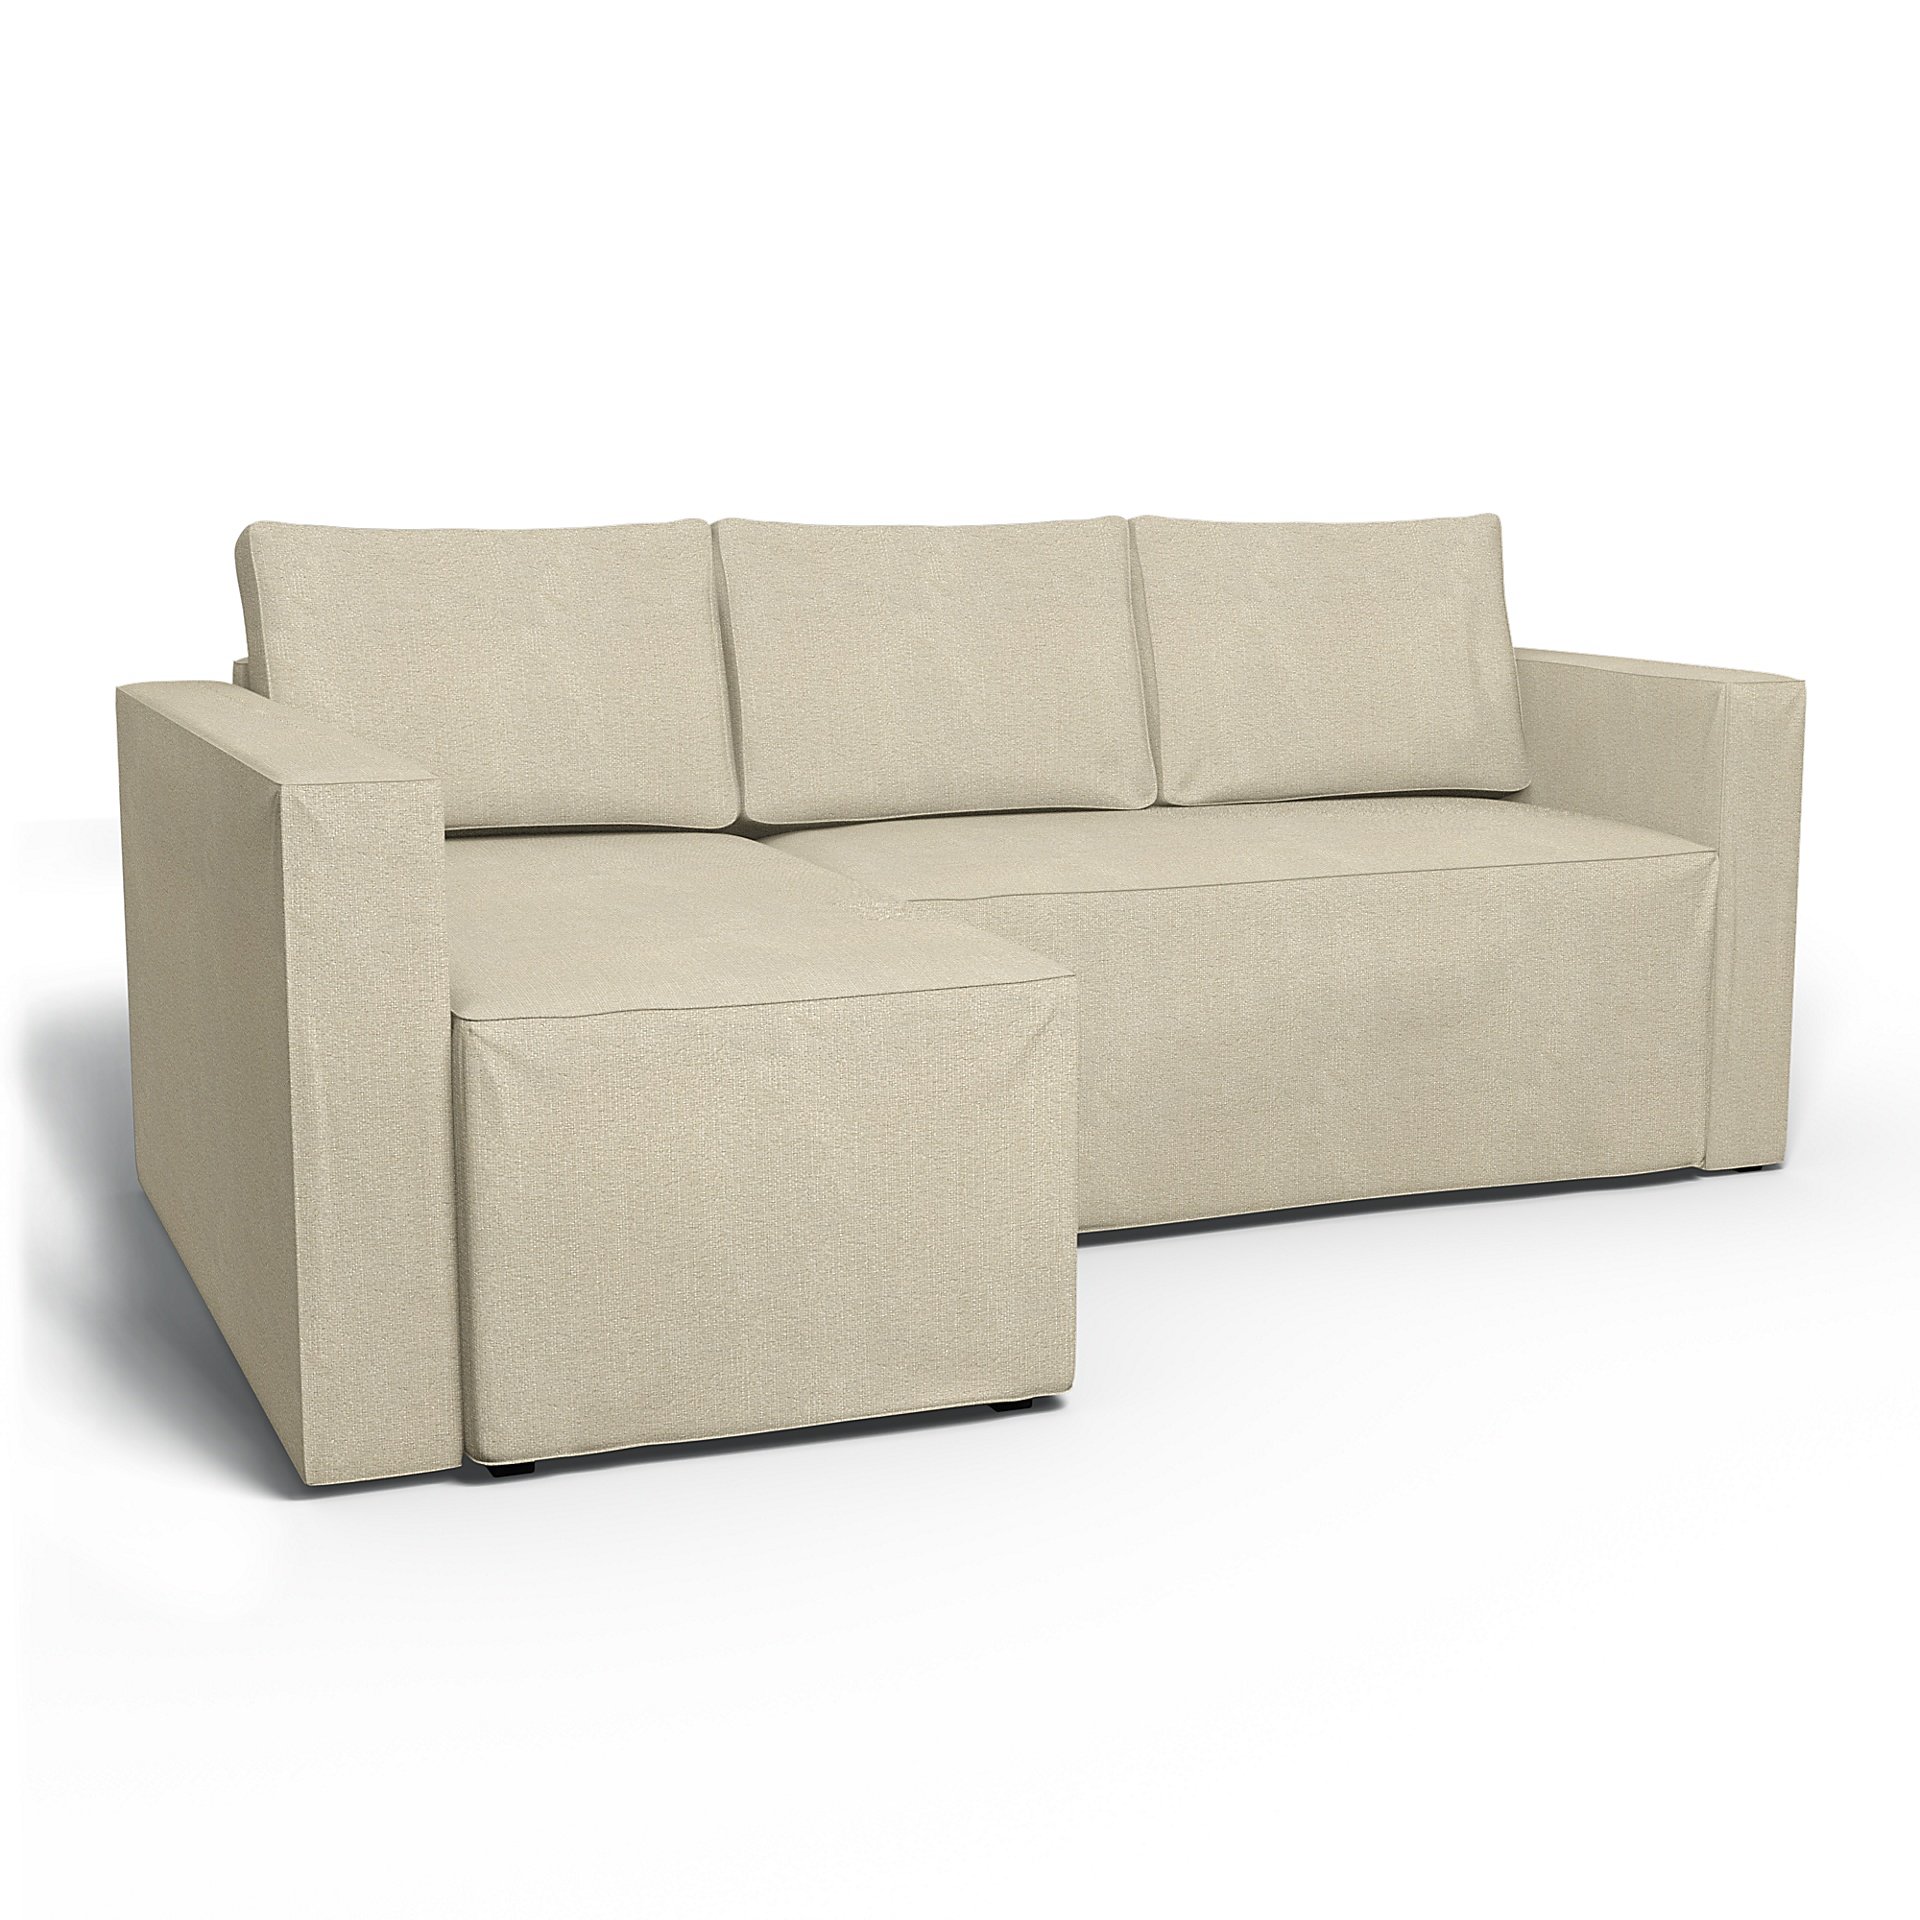 IKEA - Manstad Sofa Bed with Left Chaise Cover, Cream, Boucle & Texture - Bemz